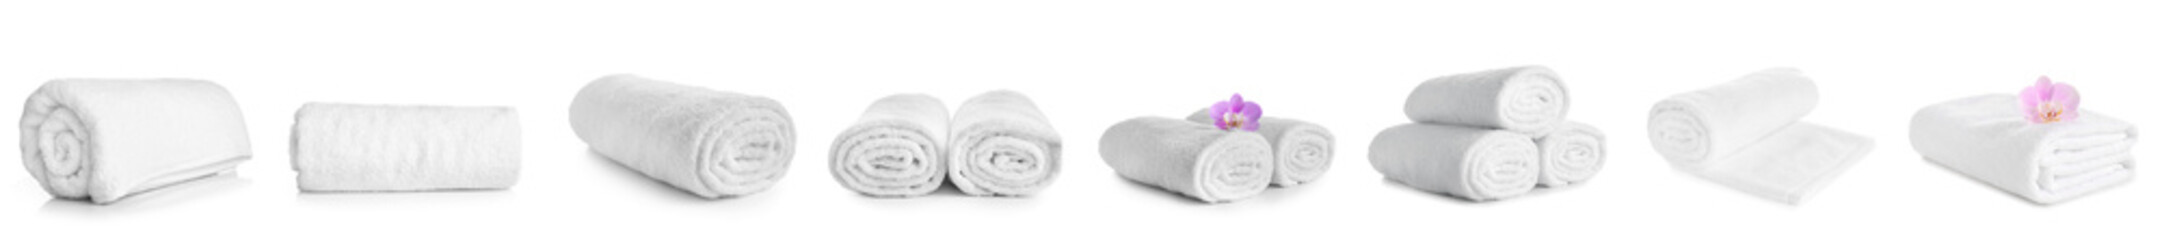 Set of clean soft towels on white background